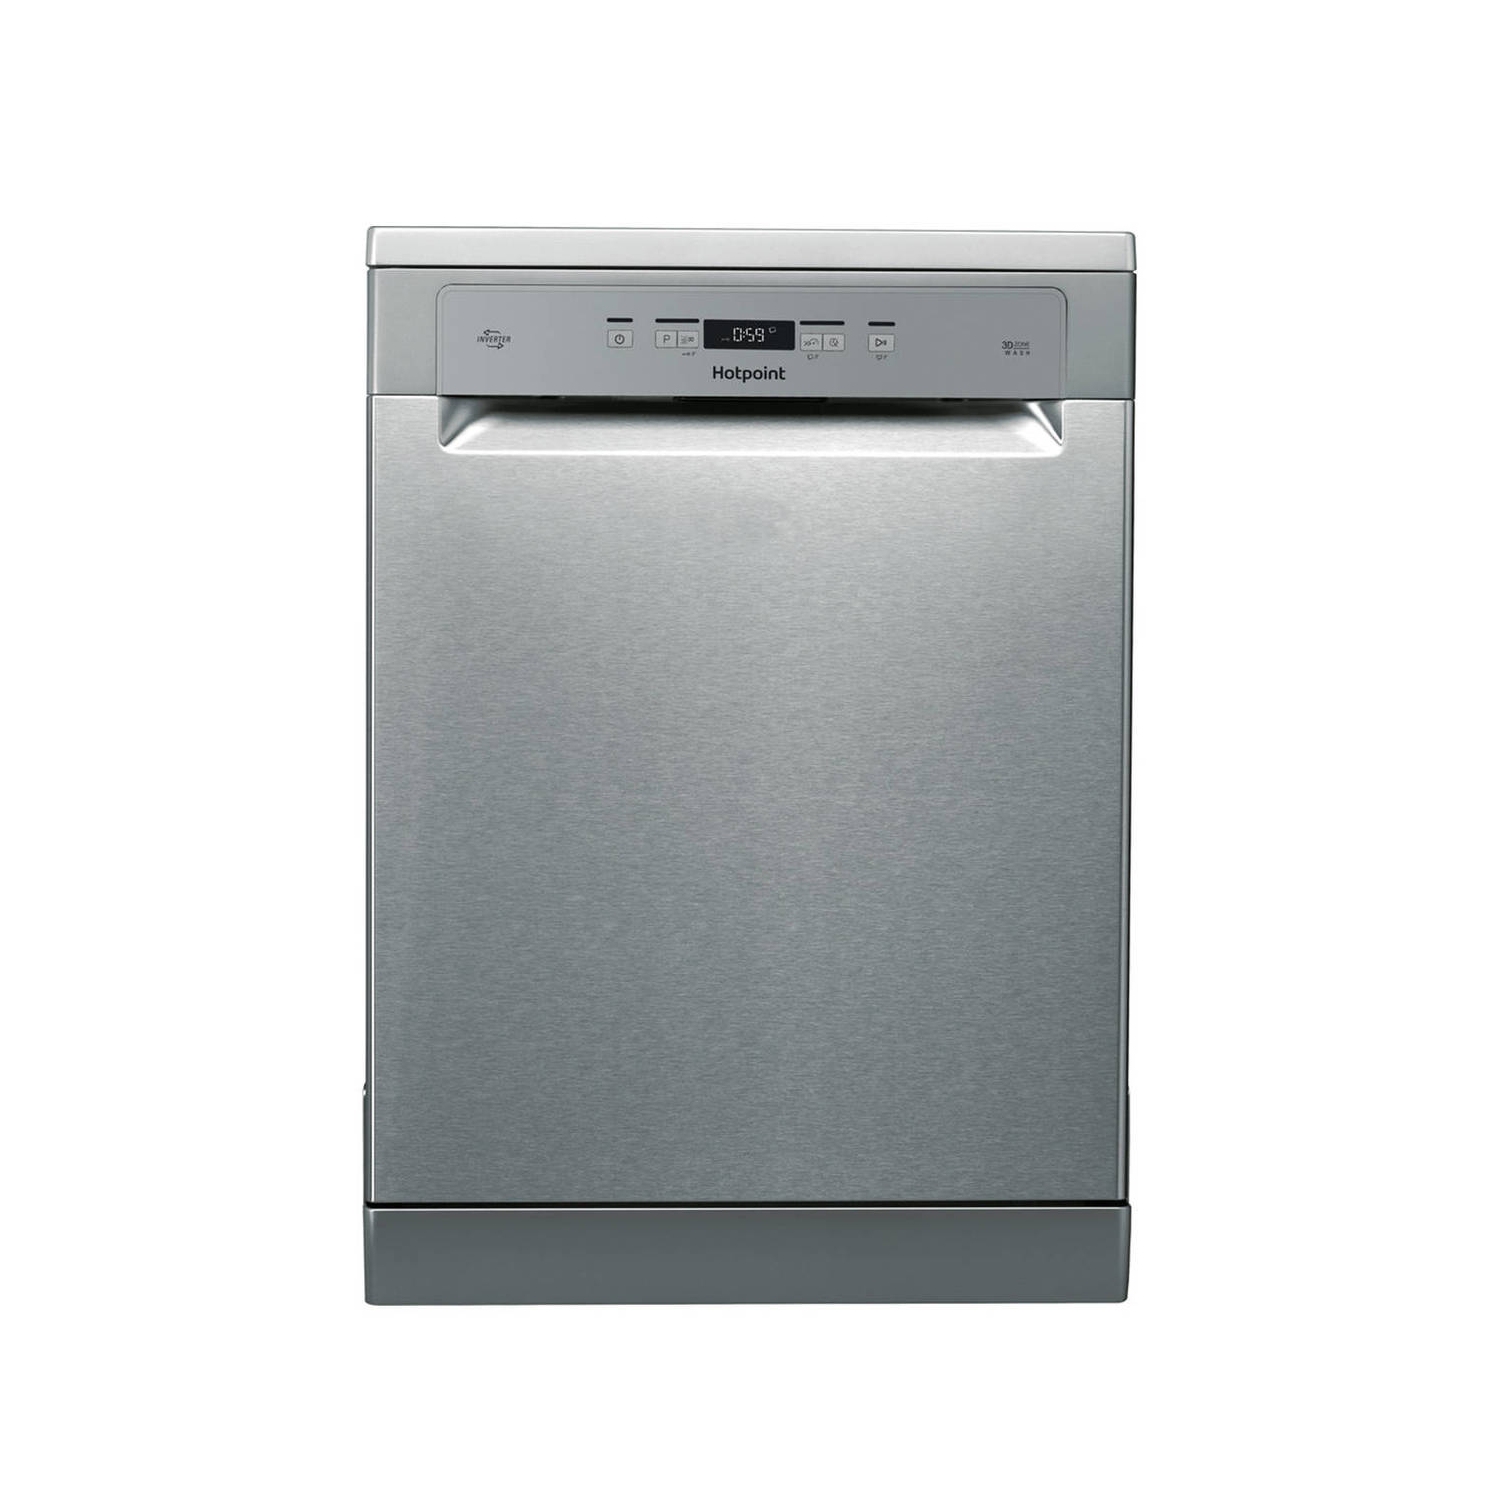 Hotpoint Full Size Dishwasher - Stainless Steel - 0